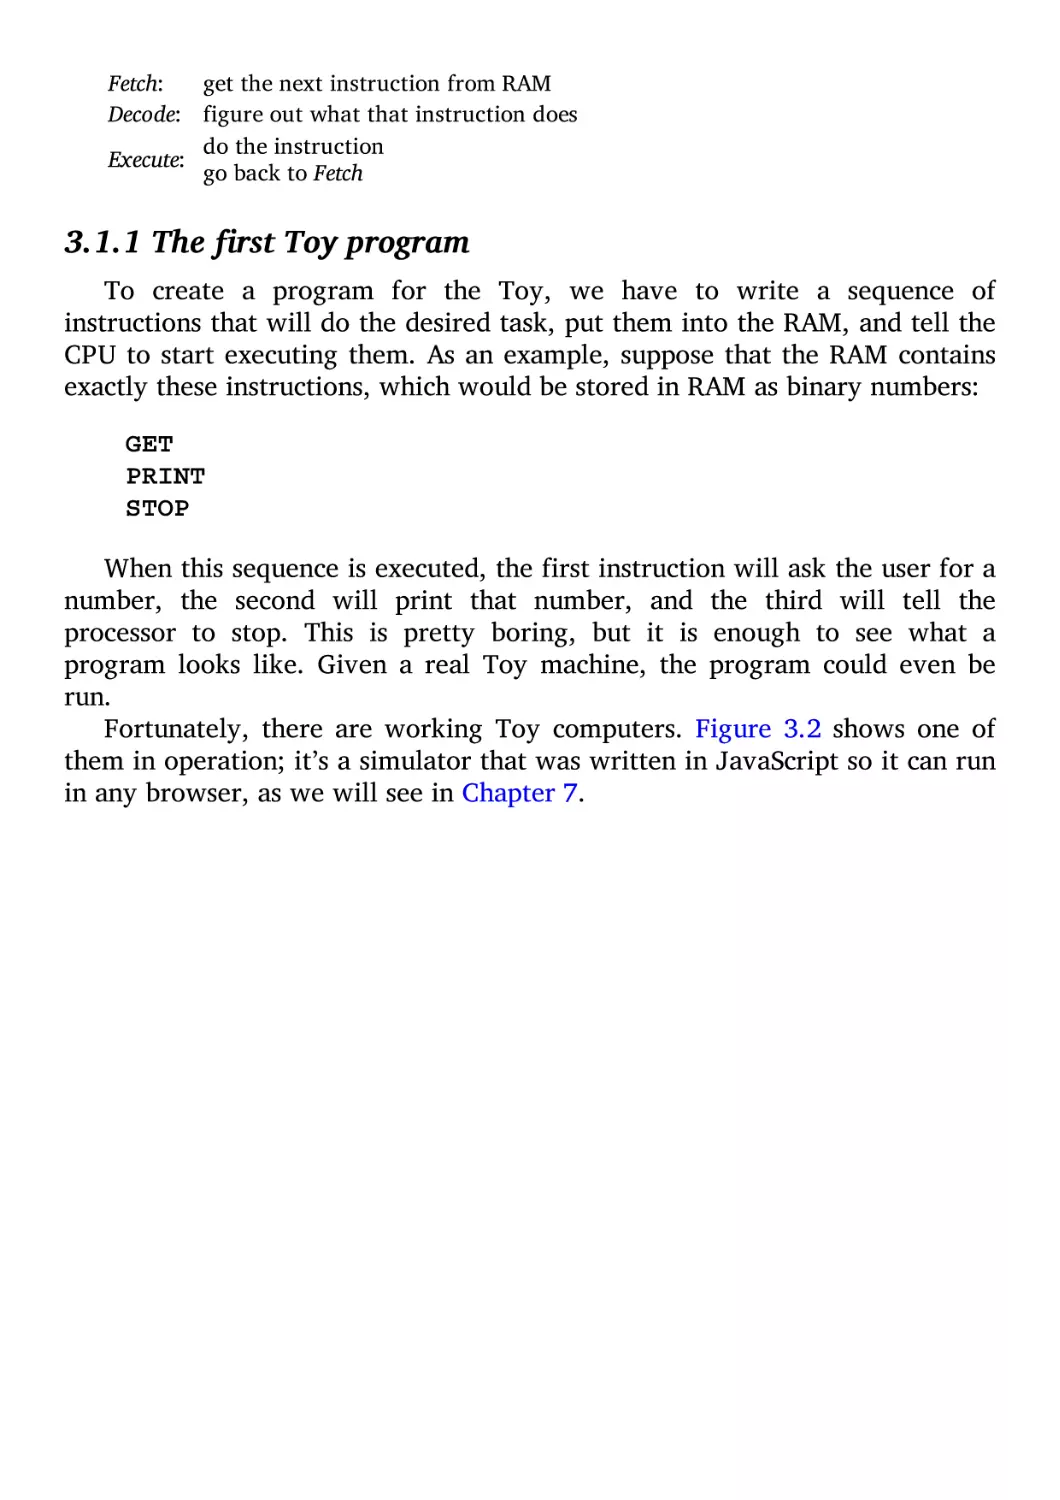 3.1.1 The first Toy program